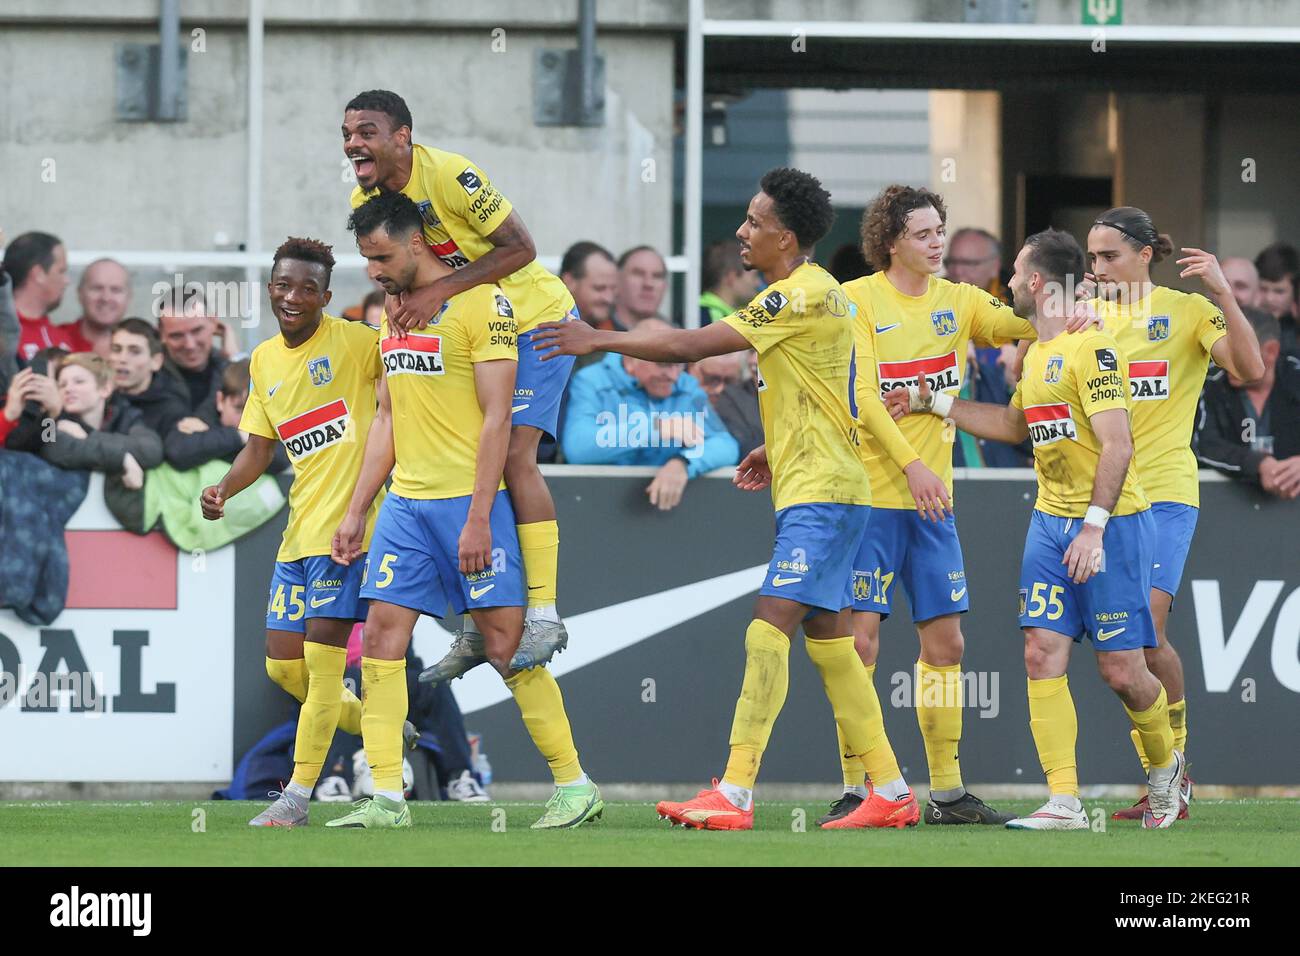 Westerlo's Nacer Chadli celebrates after scoring during a soccer match between KVC Westerlo and KV Oostende, Saturday 12 November 2022 in Westerlo, on day 17 of the 2022-2023 'Jupiler Pro League' first division of the Belgian championship. BELGA PHOTO BRUNO FAHY Stock Photo